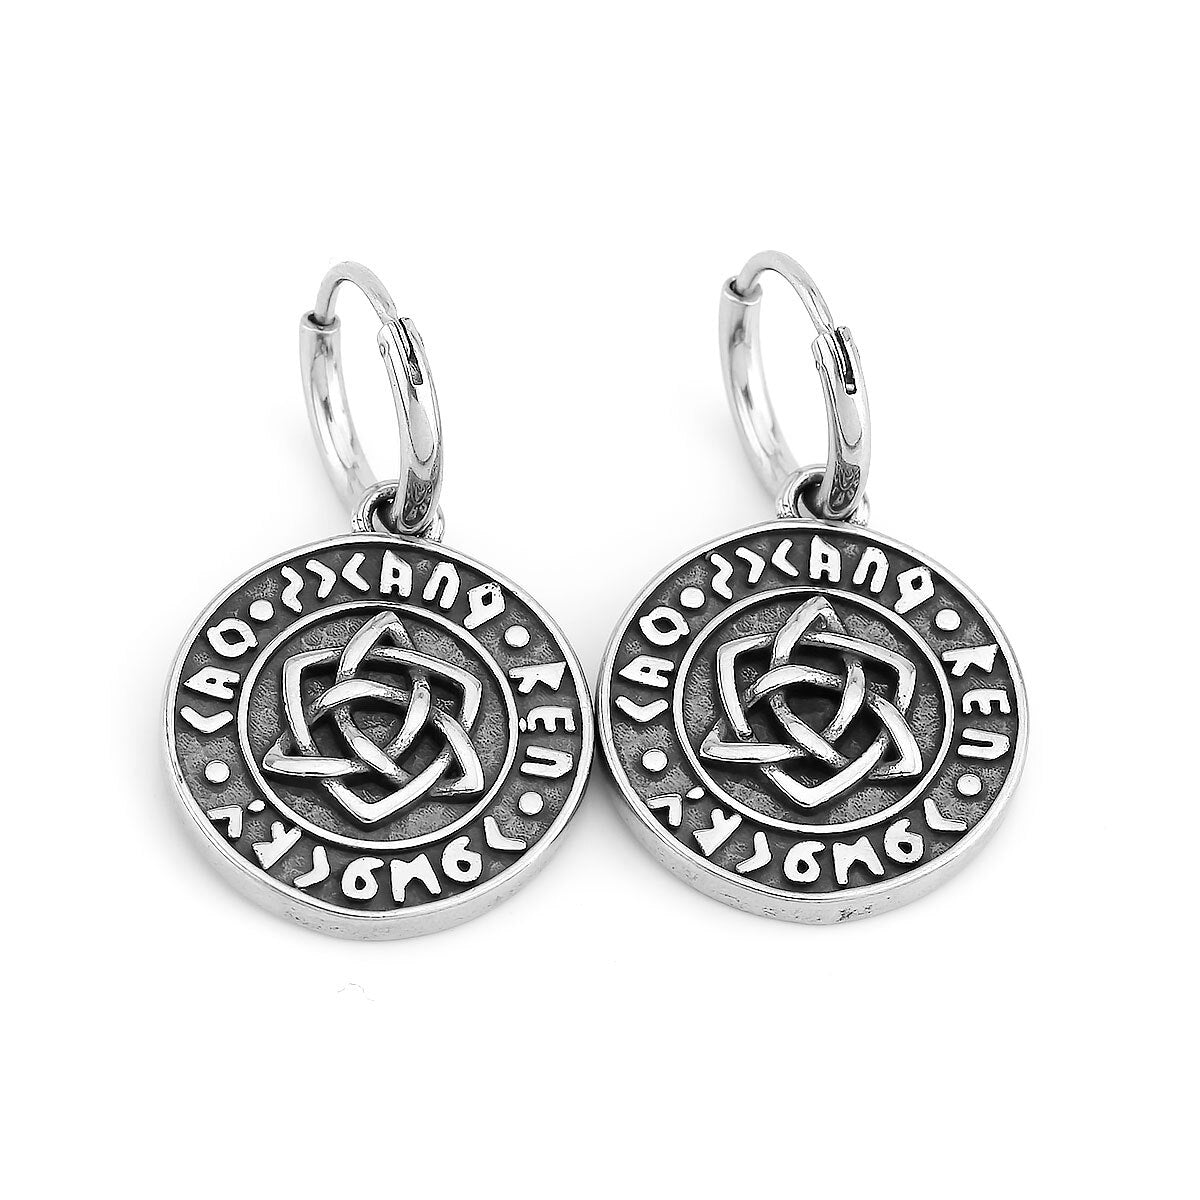 Vintage Norse Viking Rune Earrings Stainless Steel Odin Amulet Celtic Knot Accessory Hip Hop Biker Punk Jewelry Gift